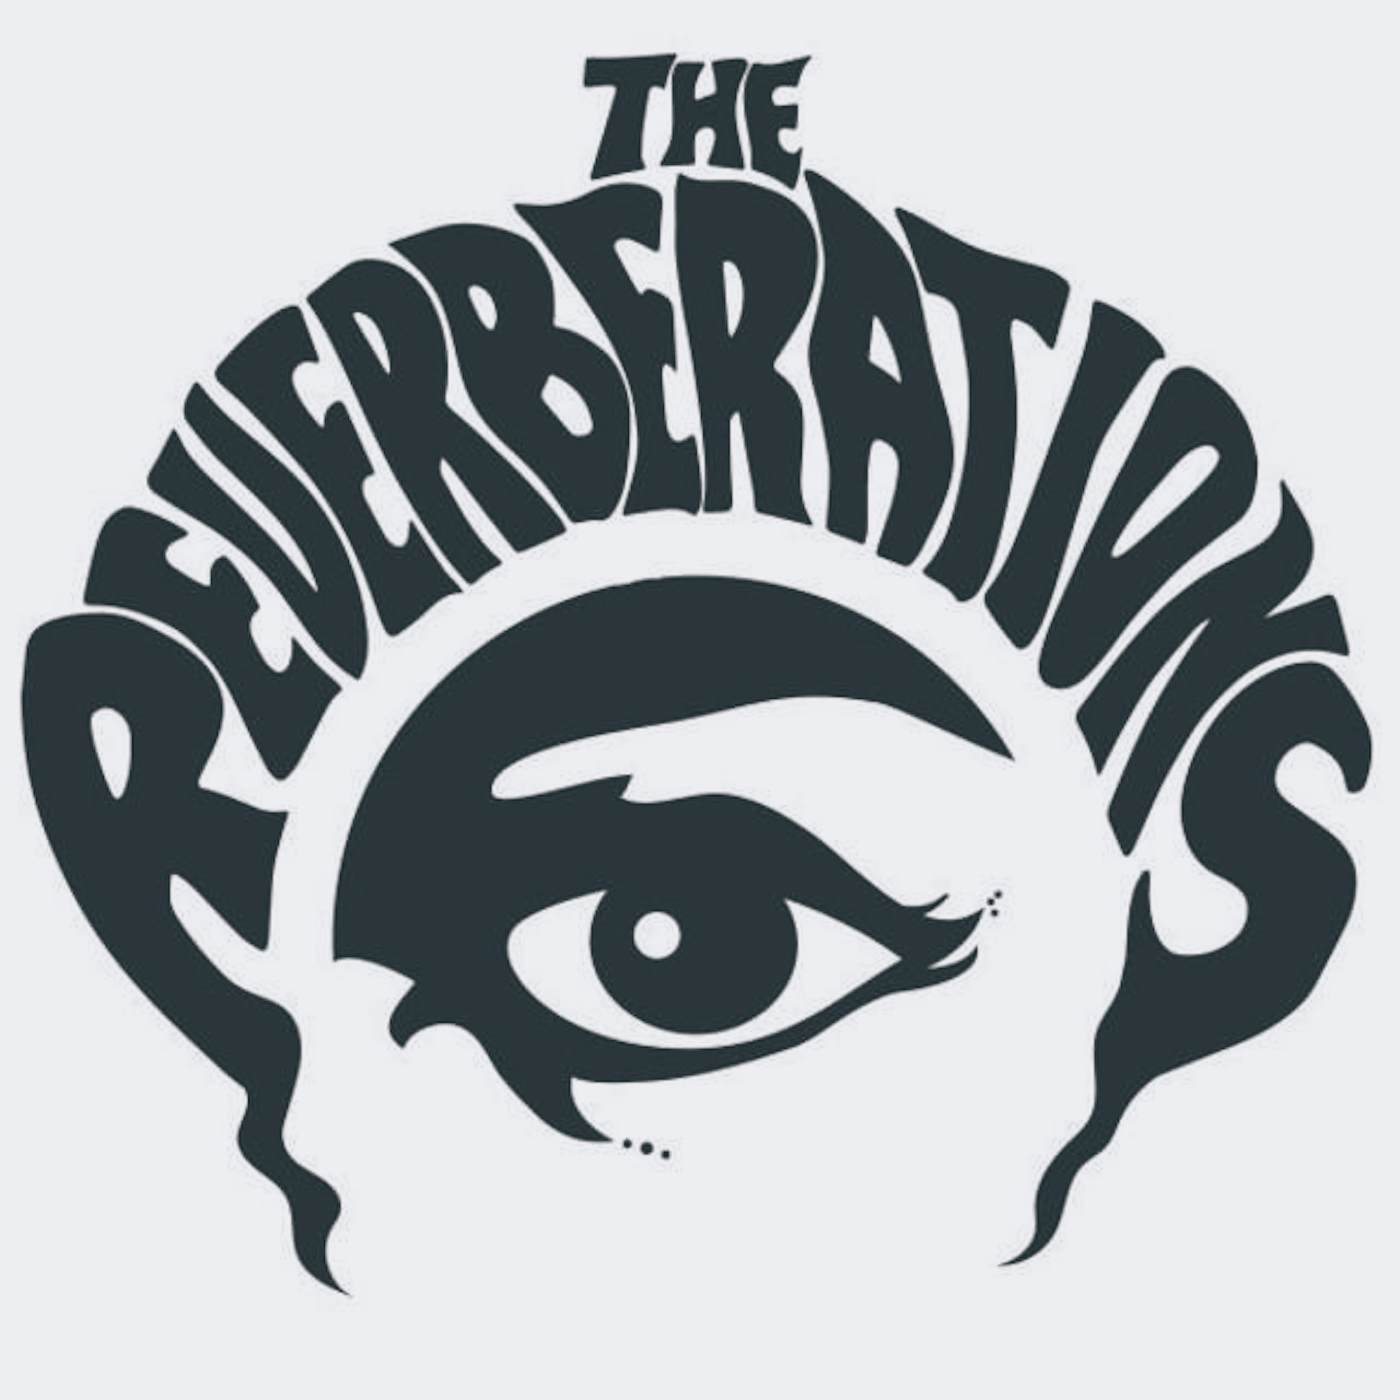 The Reverberations